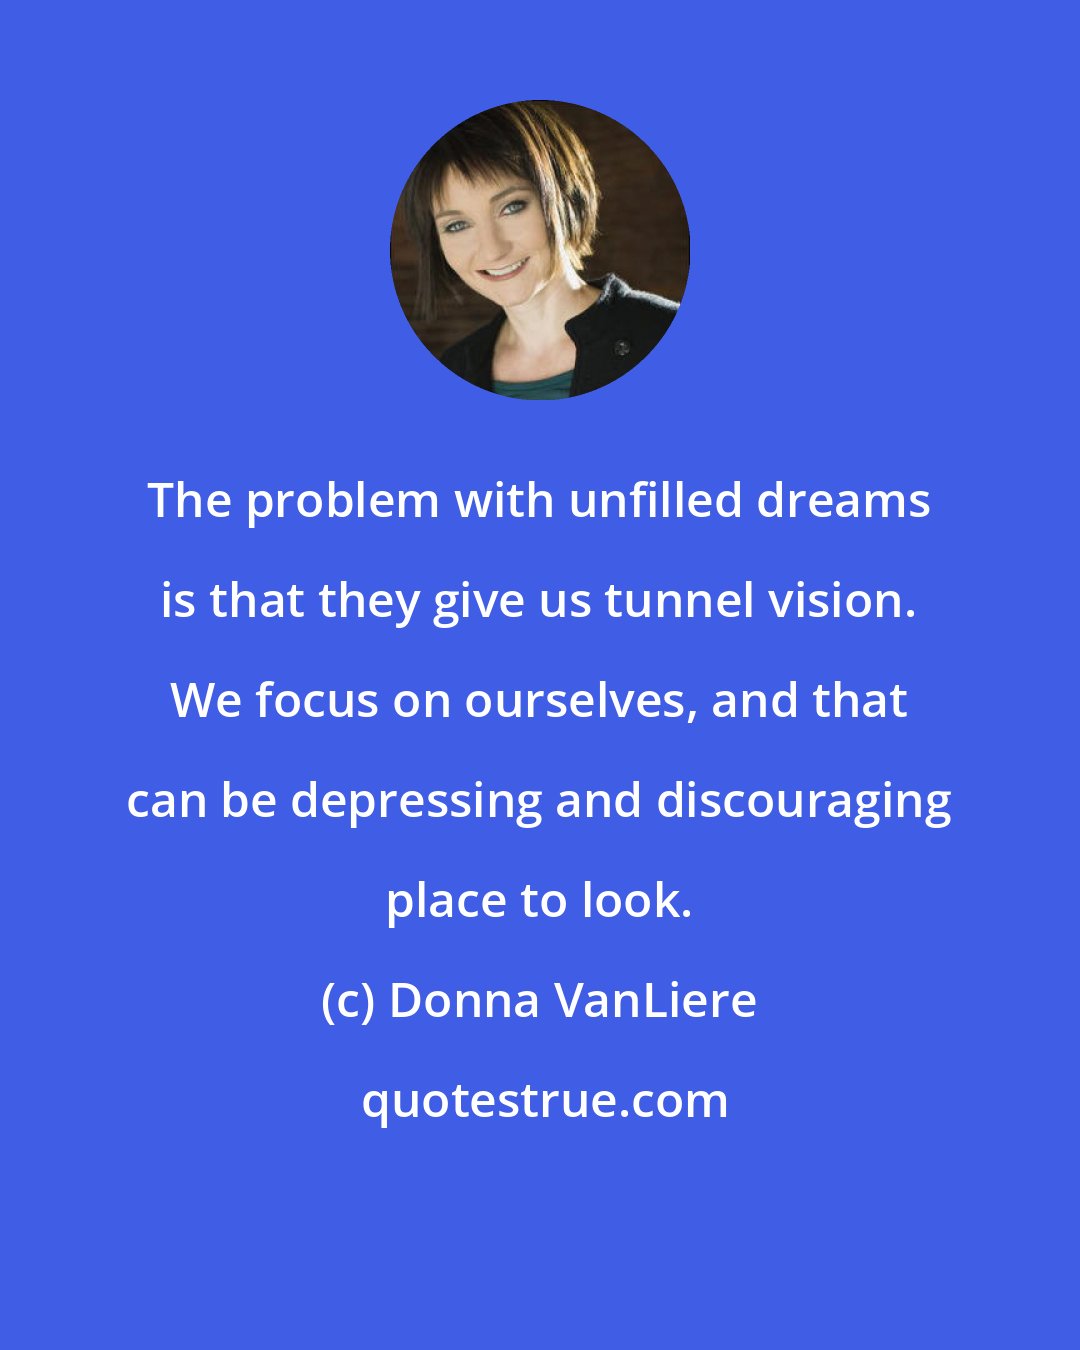 Donna VanLiere: The problem with unfilled dreams is that they give us tunnel vision. We focus on ourselves, and that can be depressing and discouraging place to look.